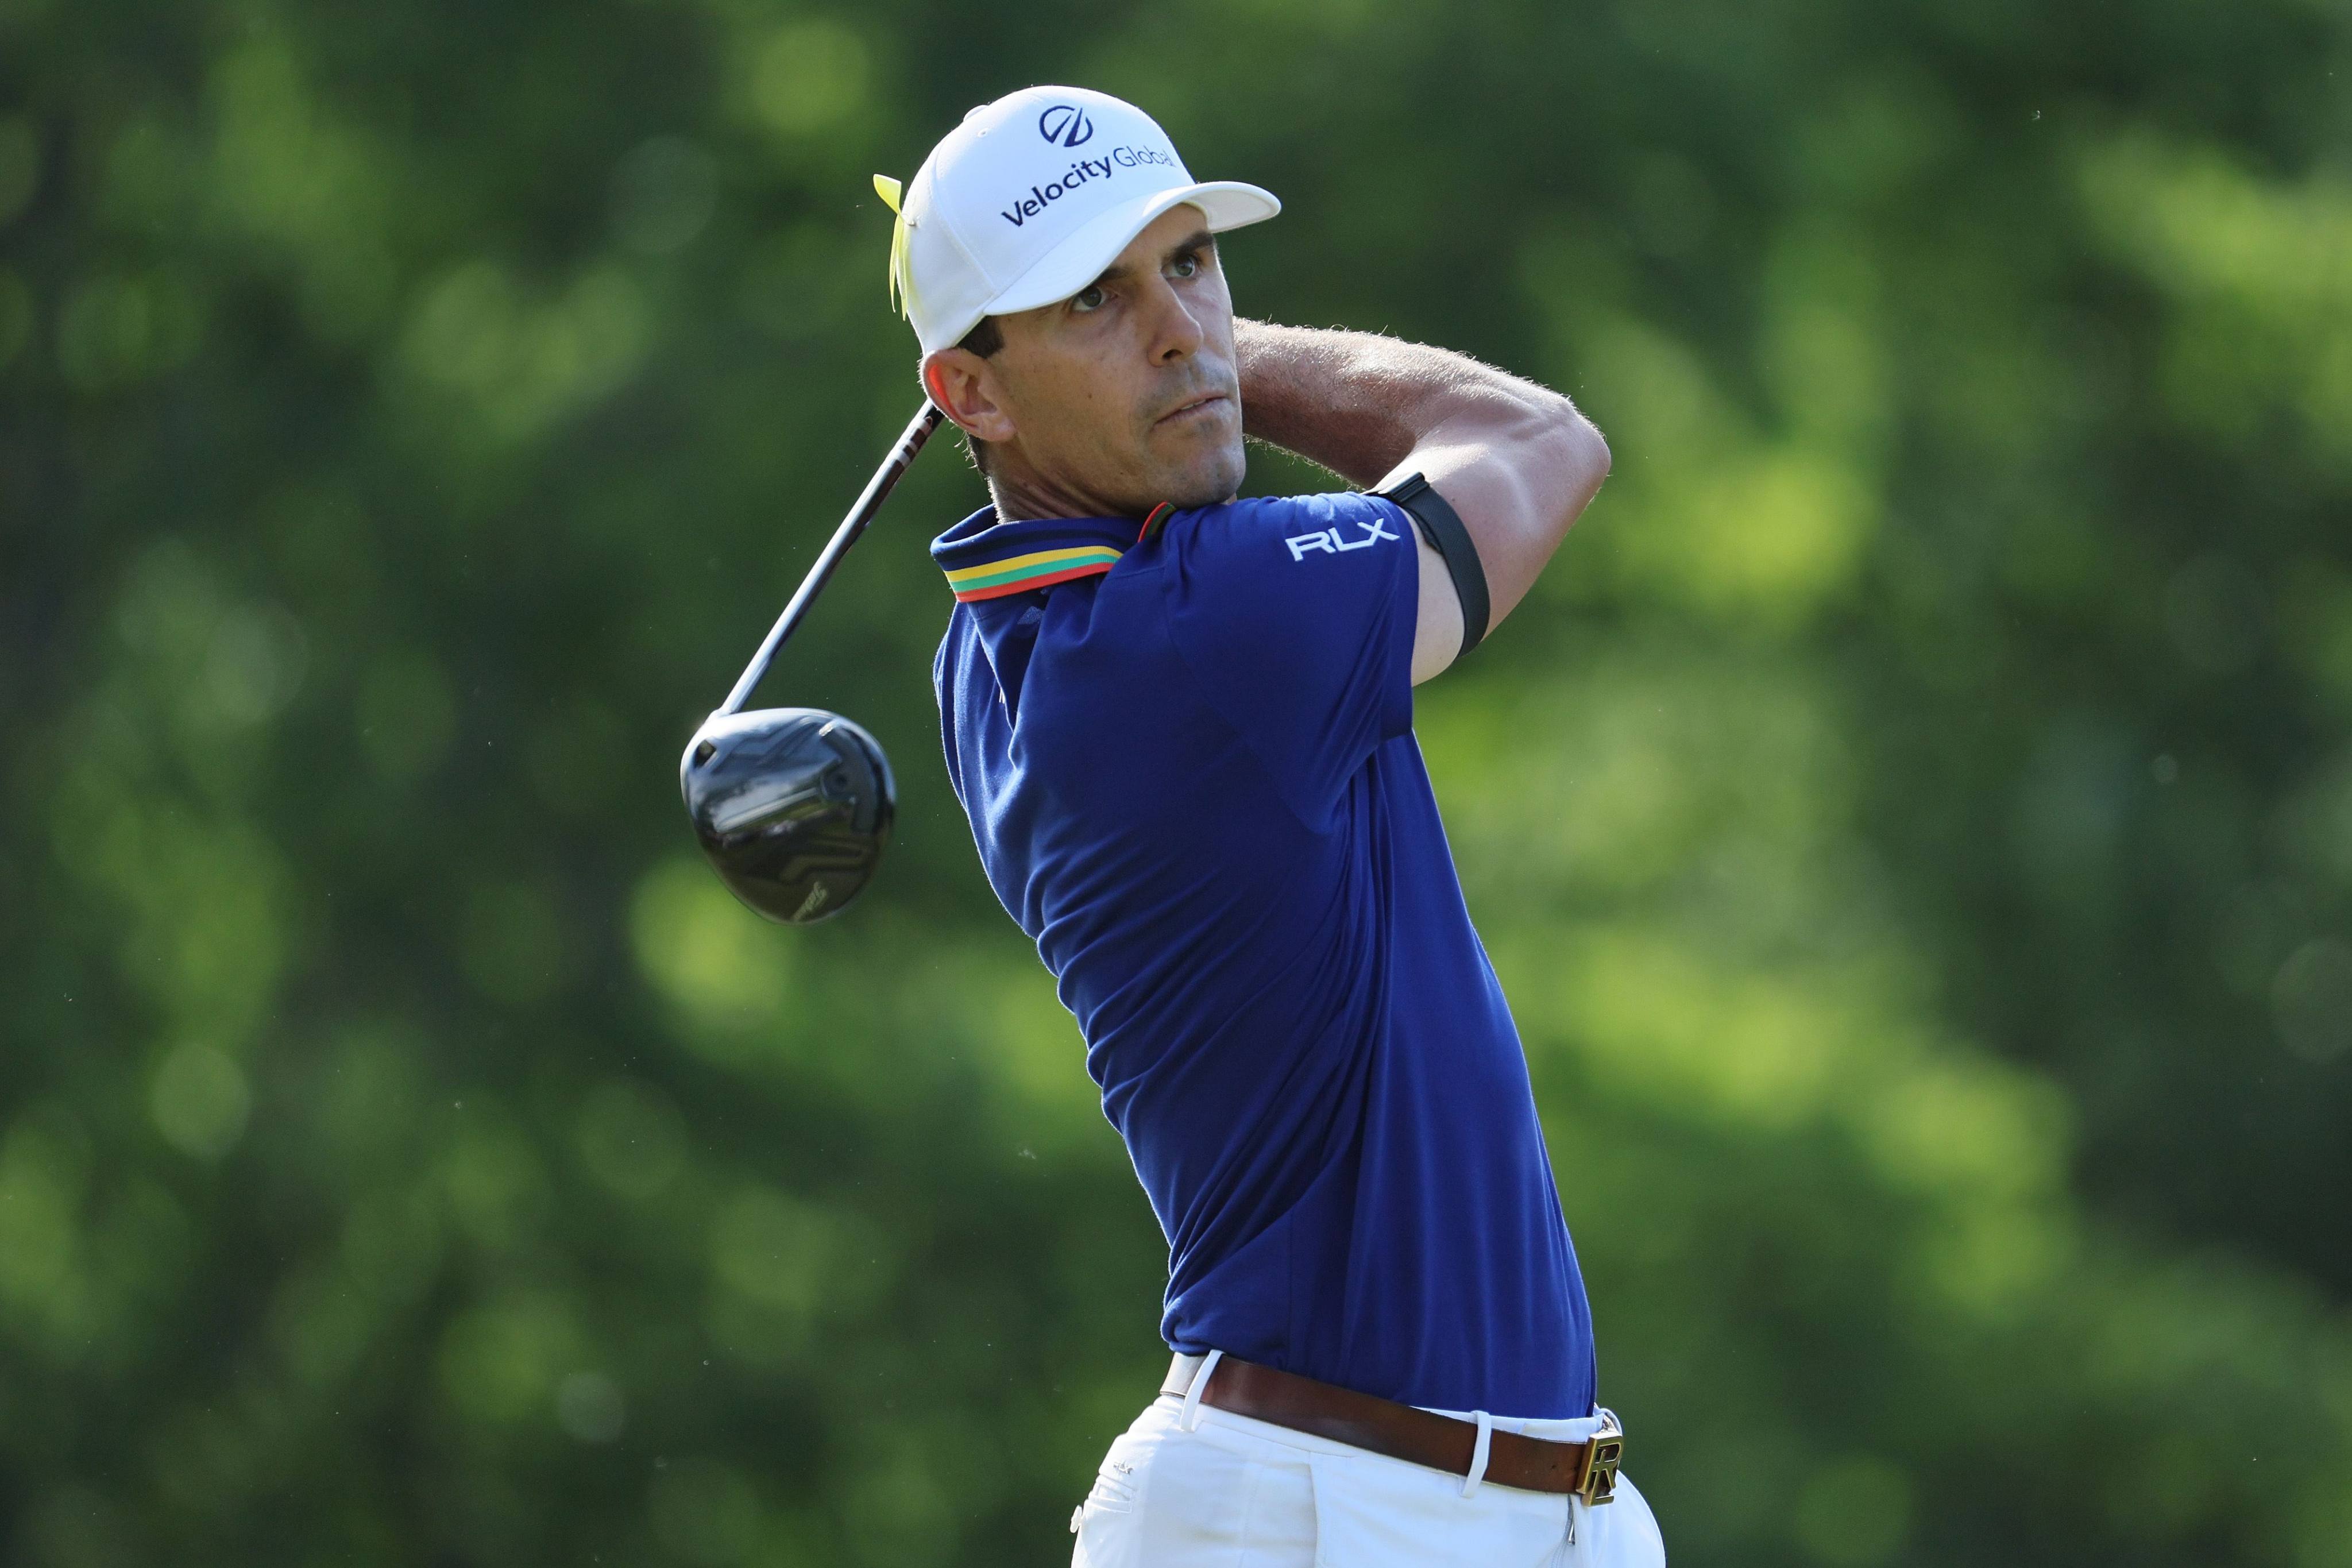 Billy Horschel plays his shot from the 18th tee during the final round of the Memorial Tournament in Dublin, Ohio. Photo: AFP